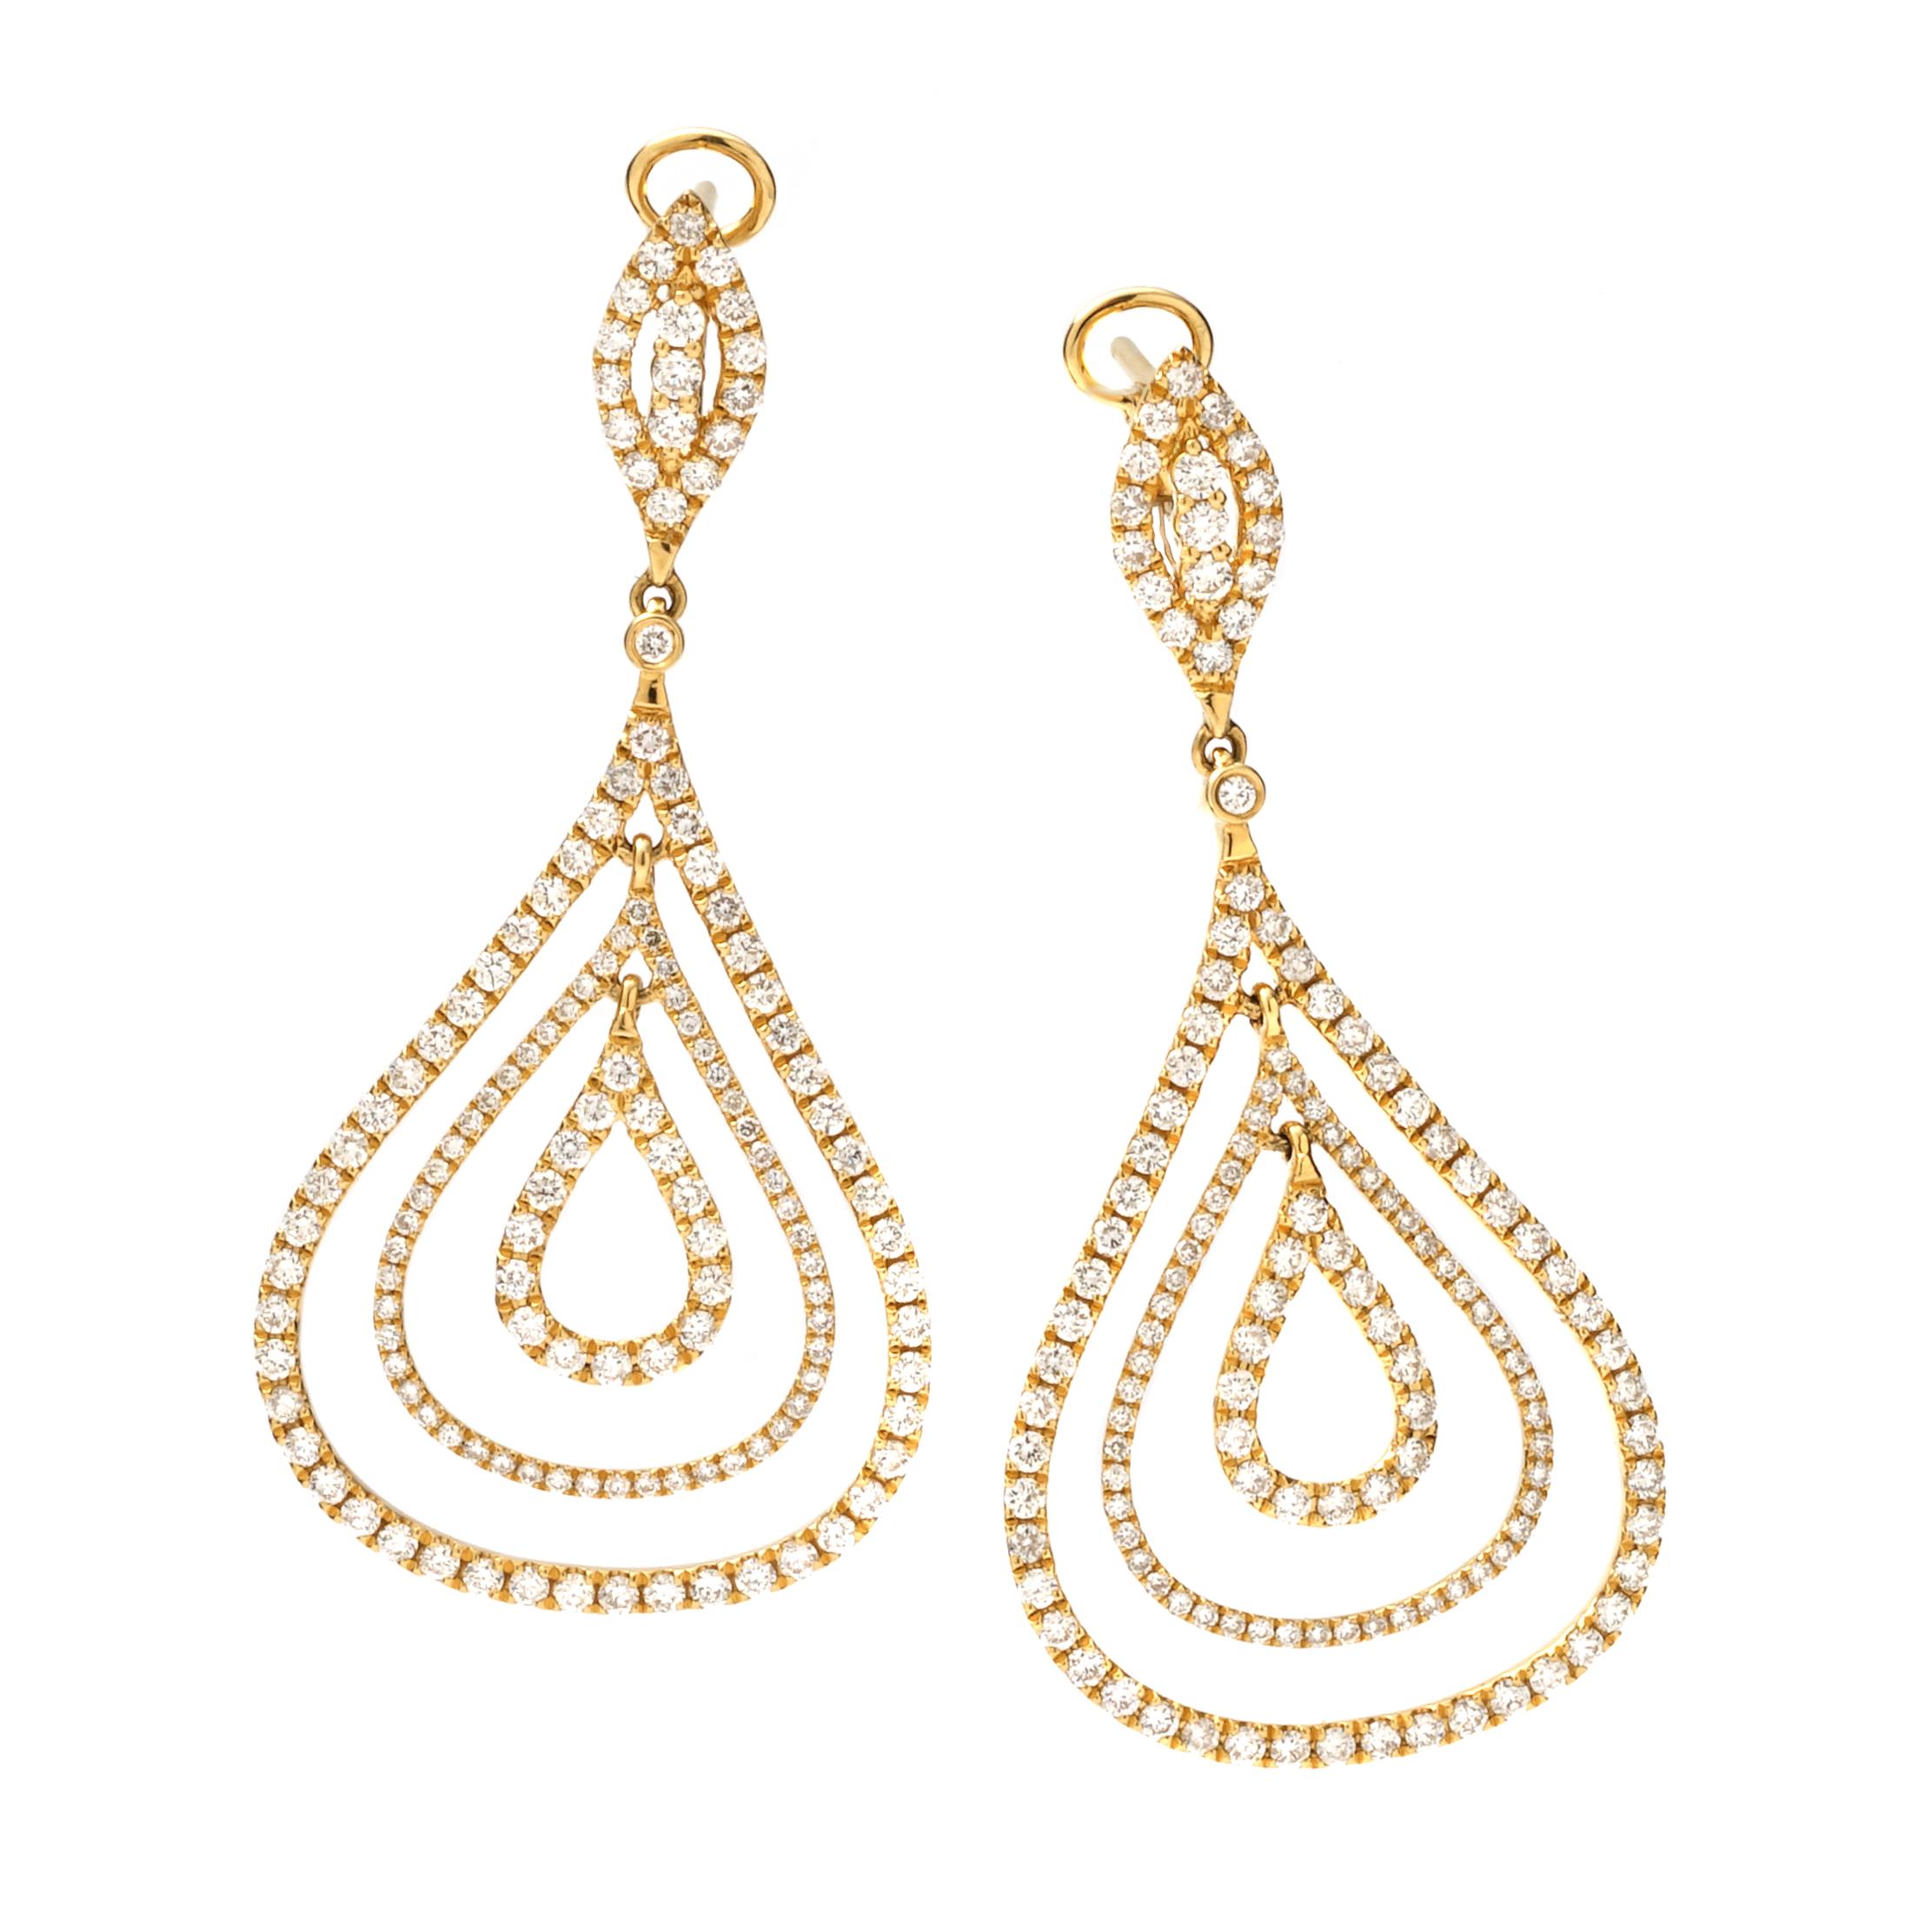 Wide Pear Shaped Layered Dangle Earrings | New York Jewelers Chicago